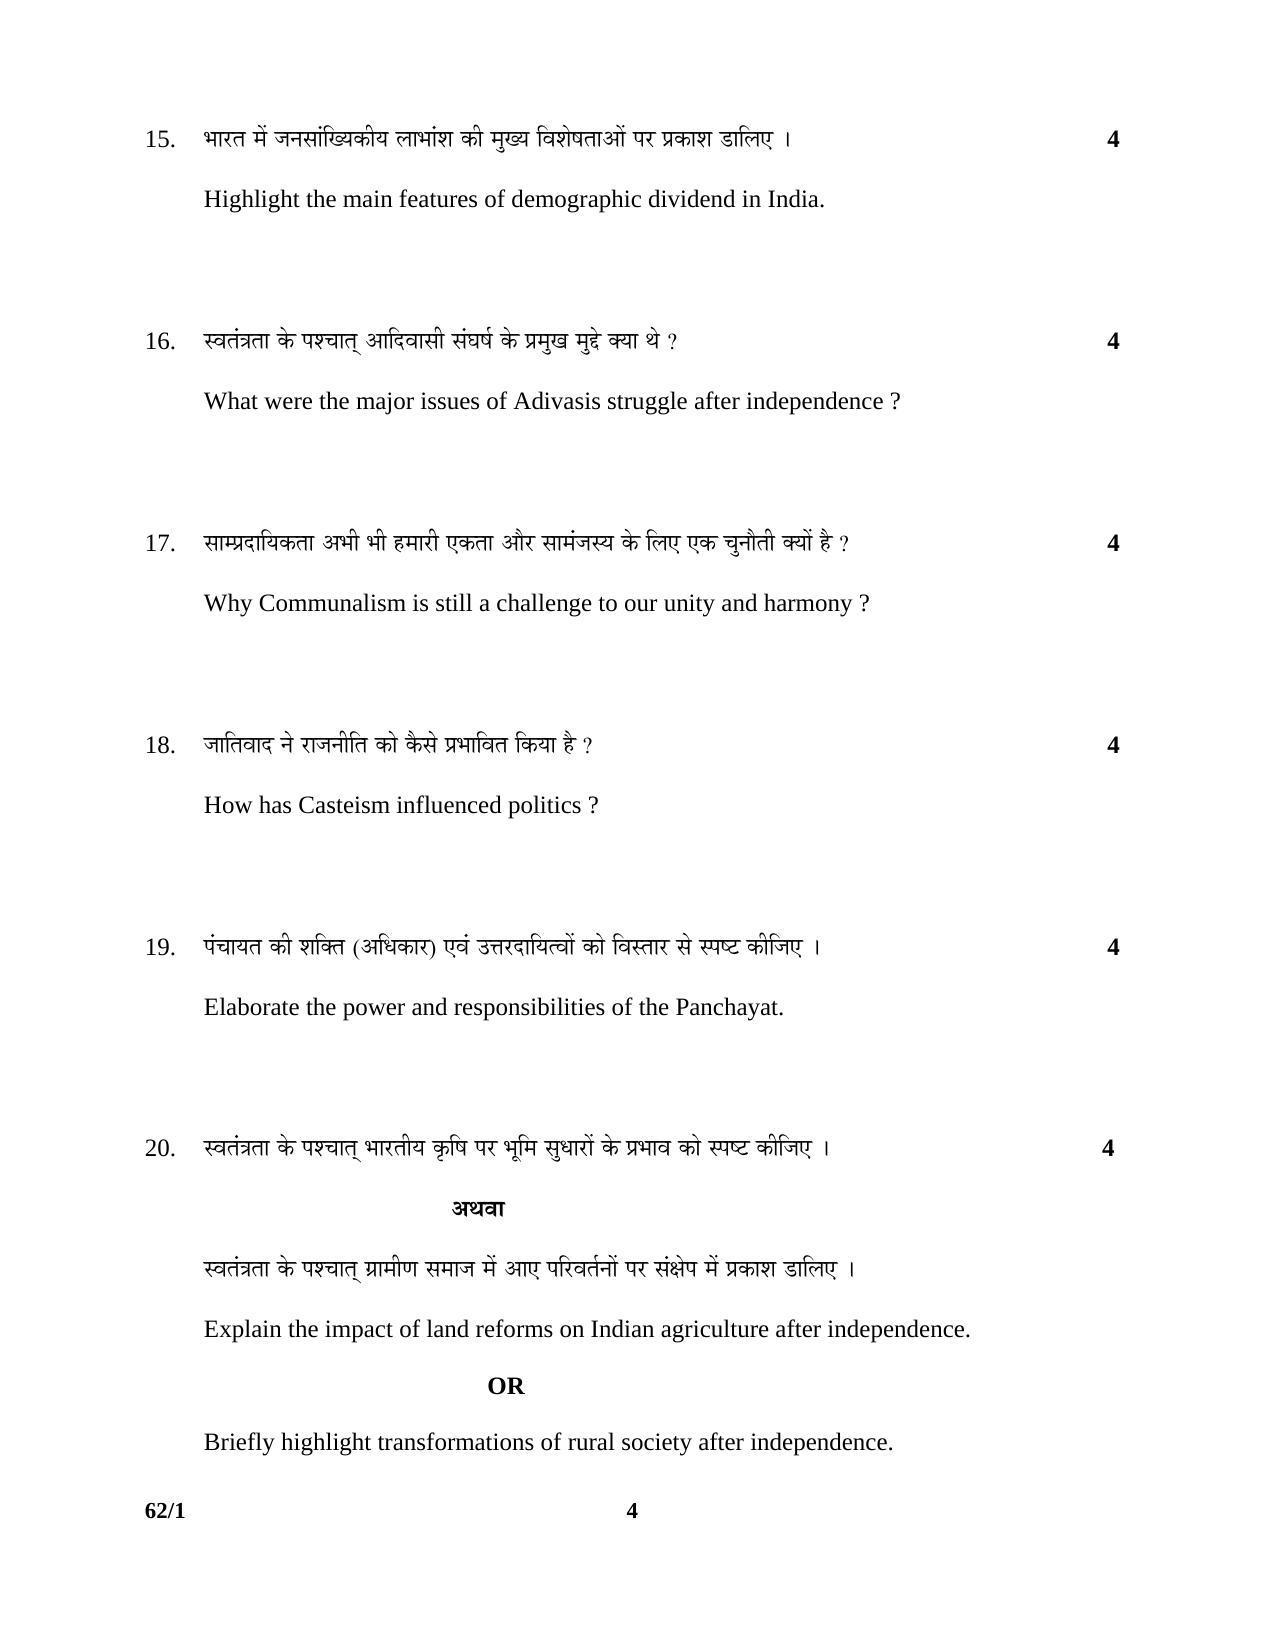 CBSE Class 12 62-1 SOCIOLOGY 2016 Question Paper - Page 4